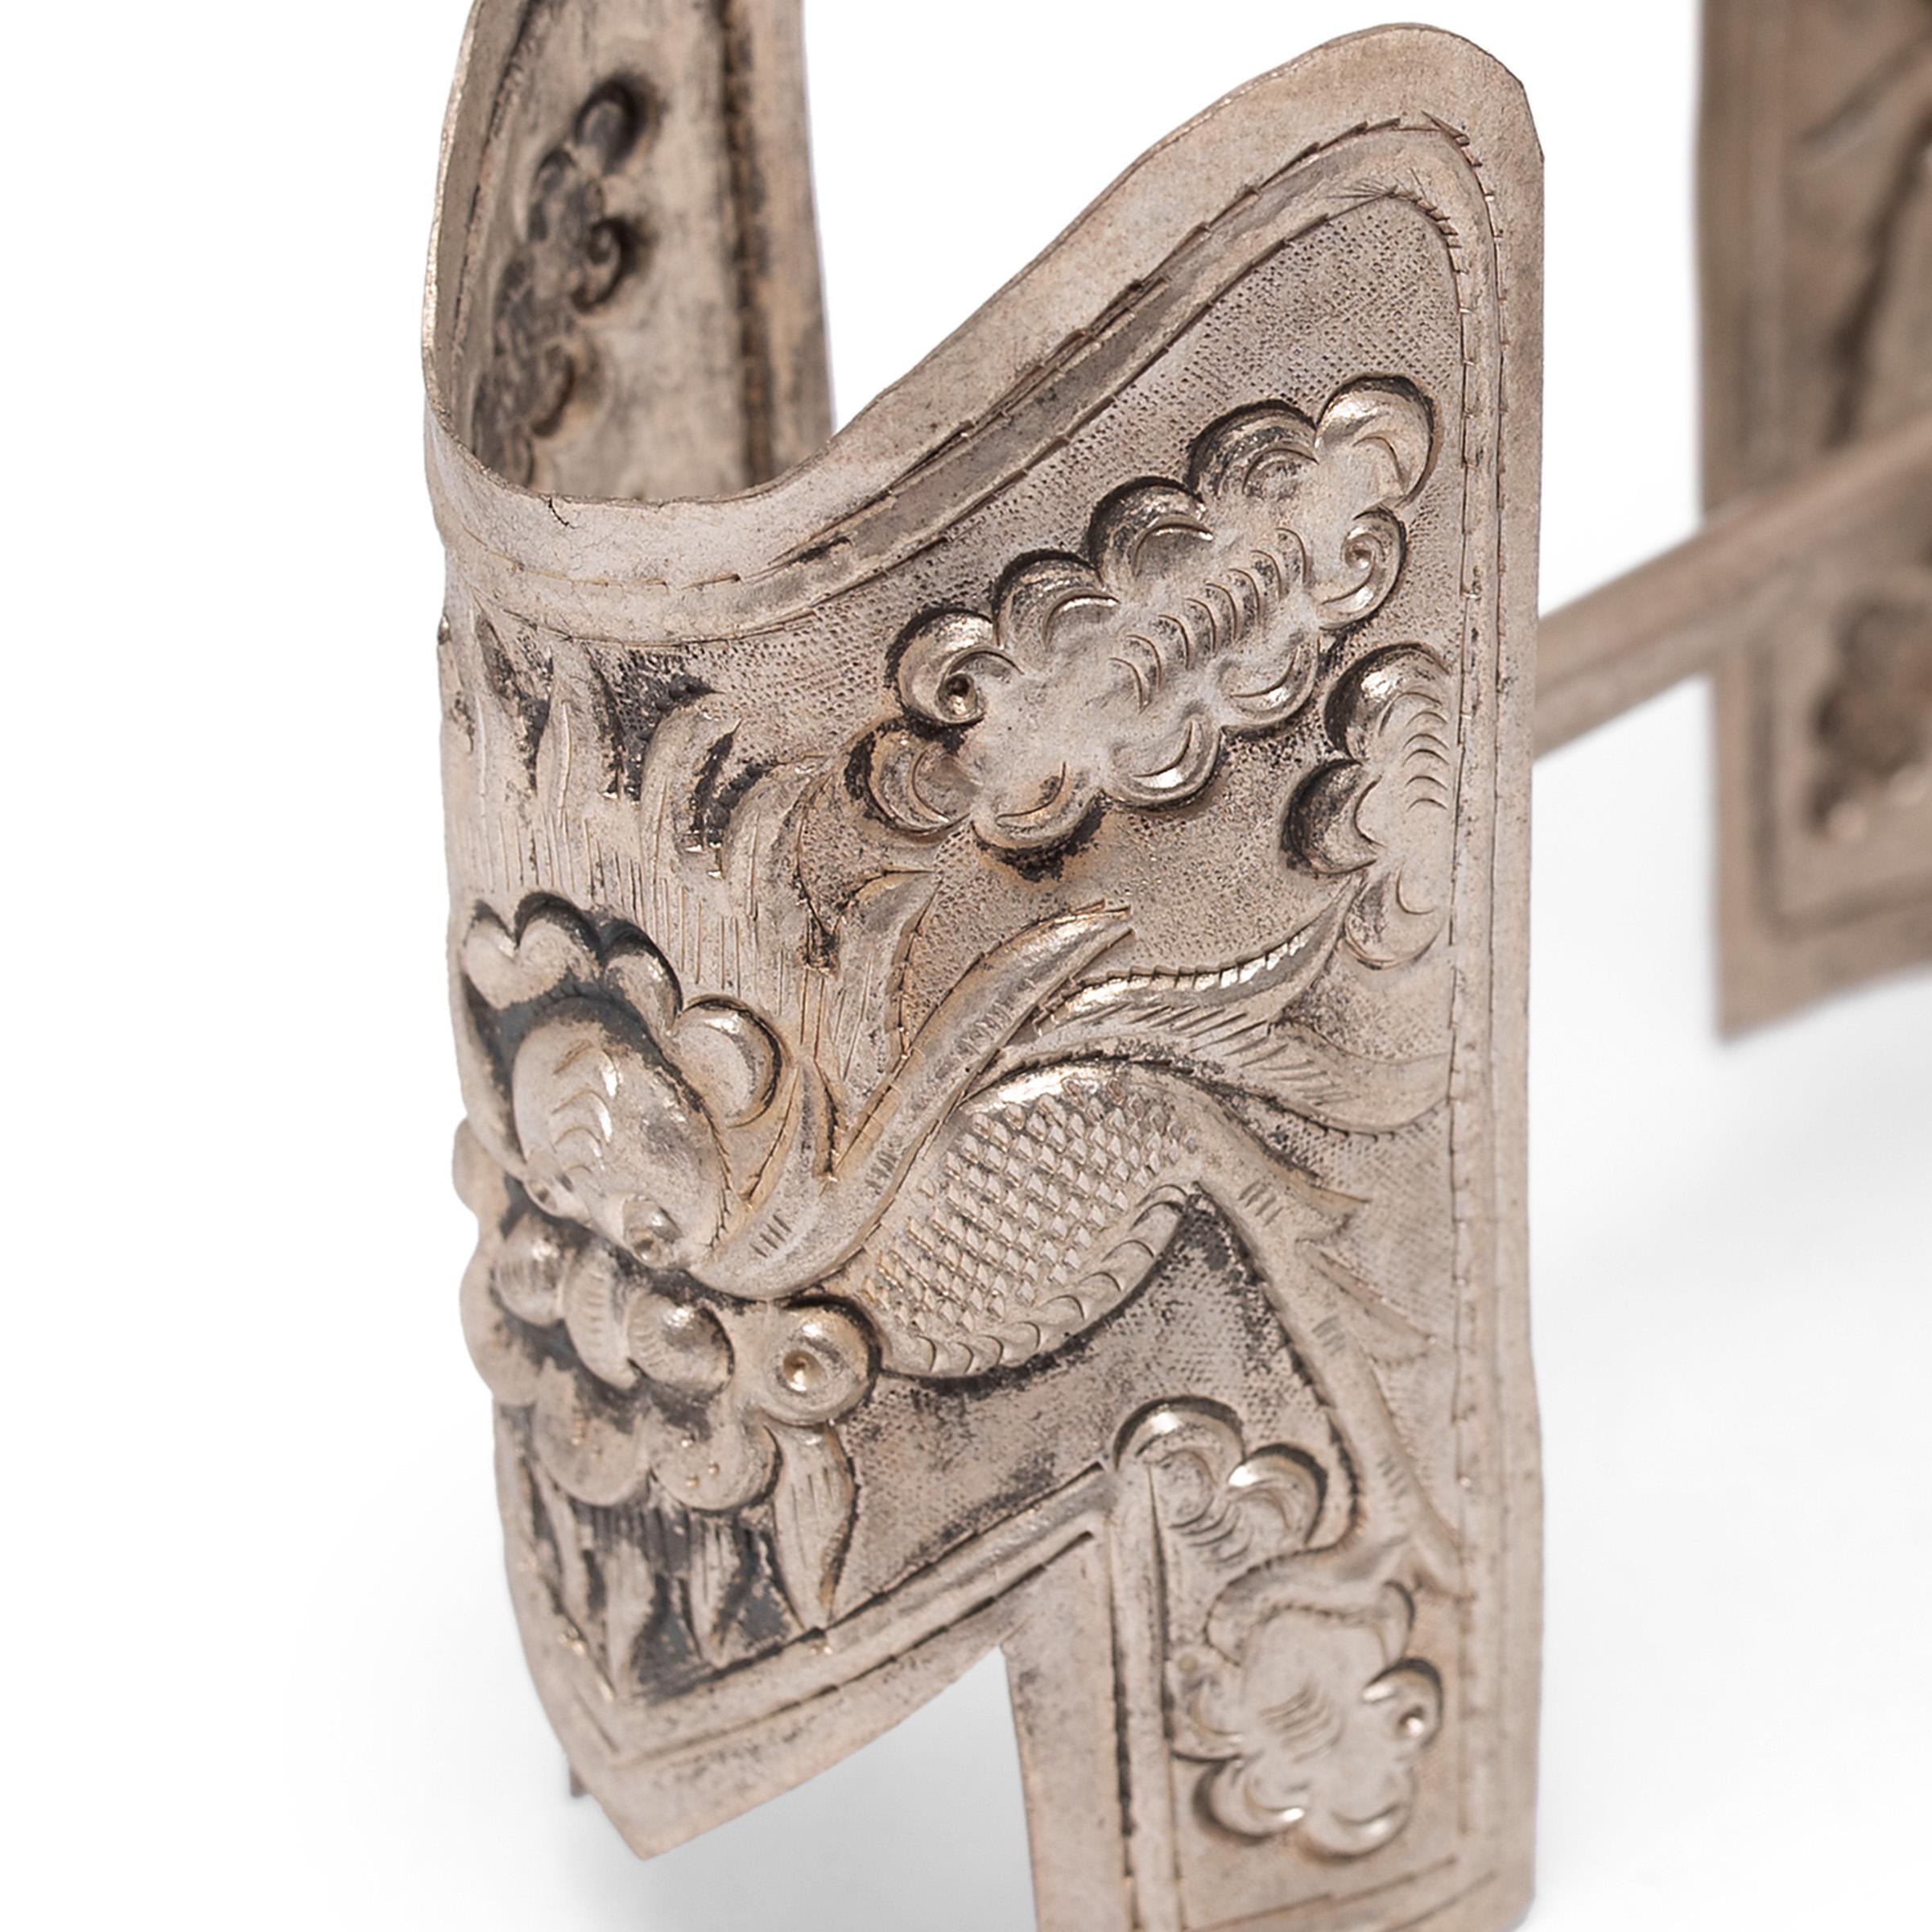 This unusual piece of silver hardware is wonderfully patterned with intricate Tibetan repoussé decoration. Comprised of two thin silver plates linked by a straight rod, the metal fitting is decorated on each side with a fearsome dragon, his feet in